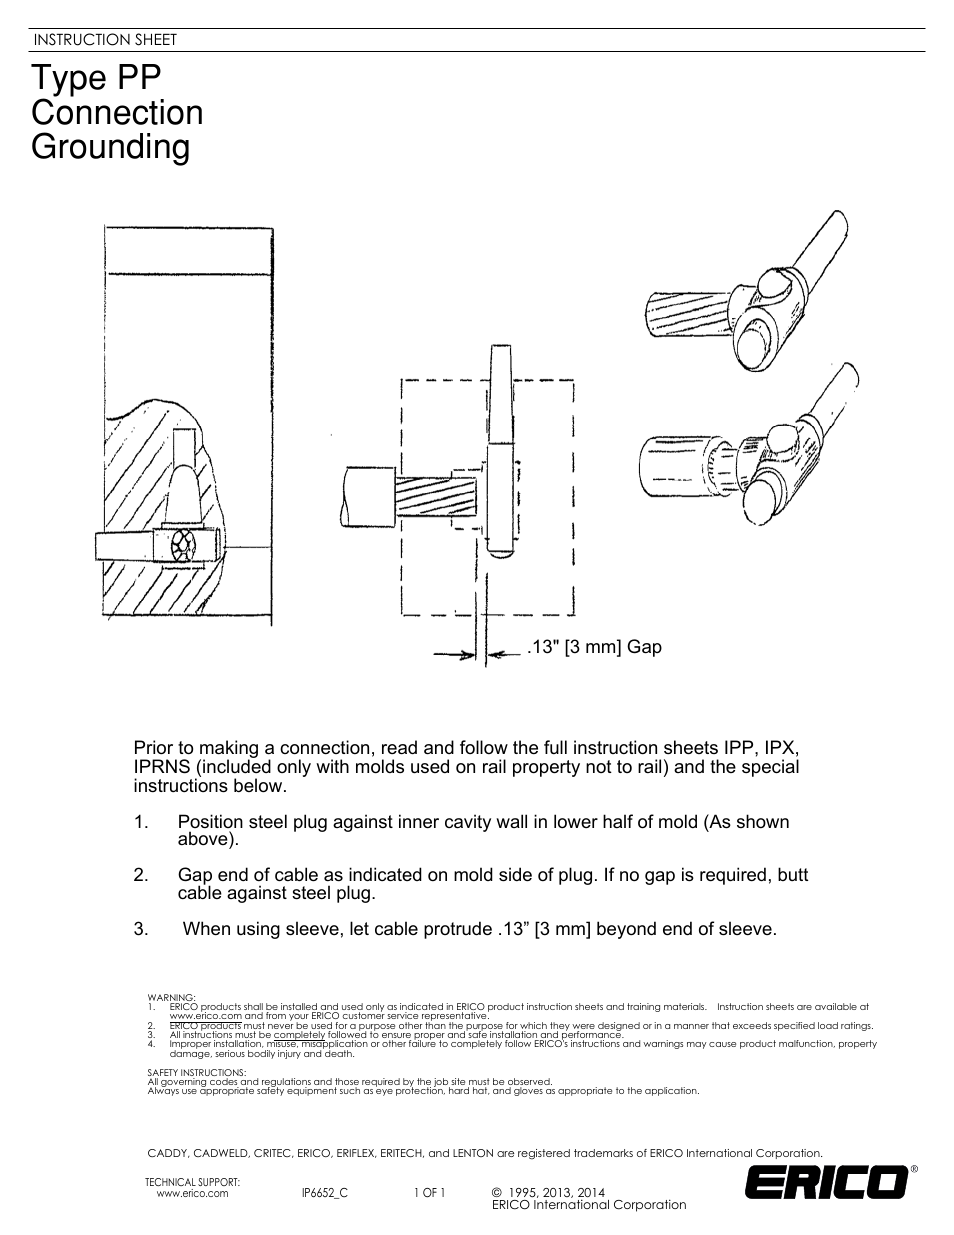 IP6652 Type PP Connection Grounding